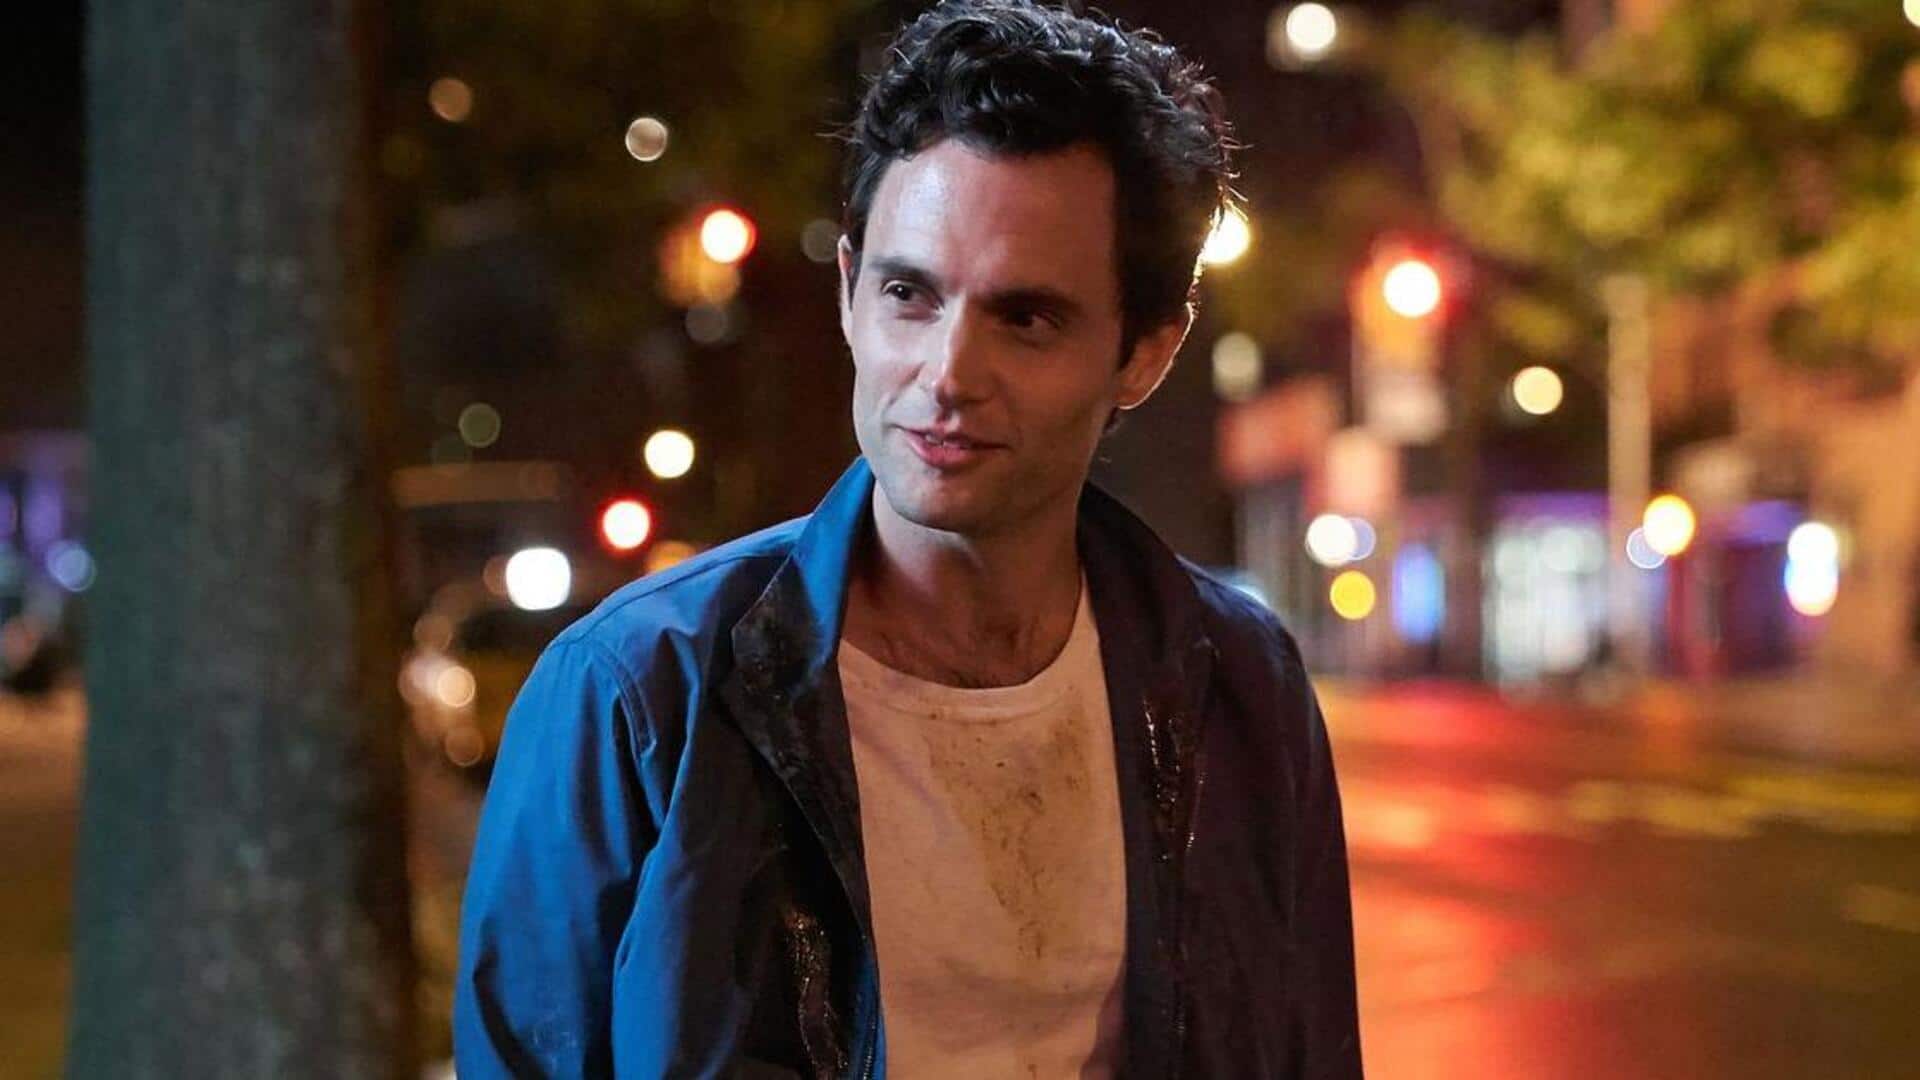 5 years of 'You': What made Penn Badgley-led series successful